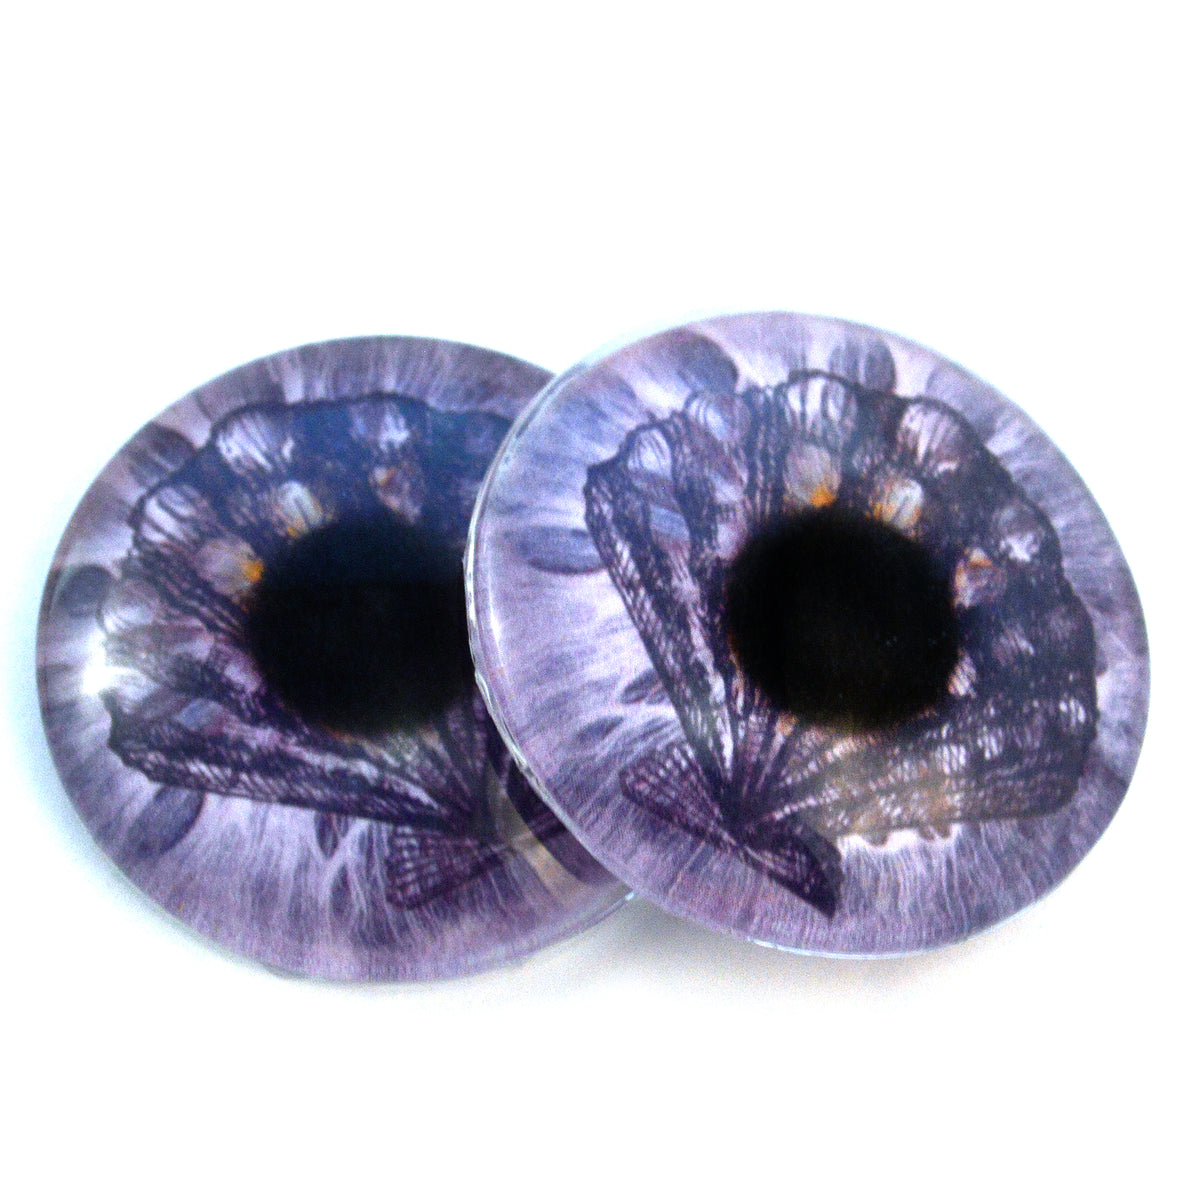 Cabochon Glass Eyes Discontinued Colors 1 Pair